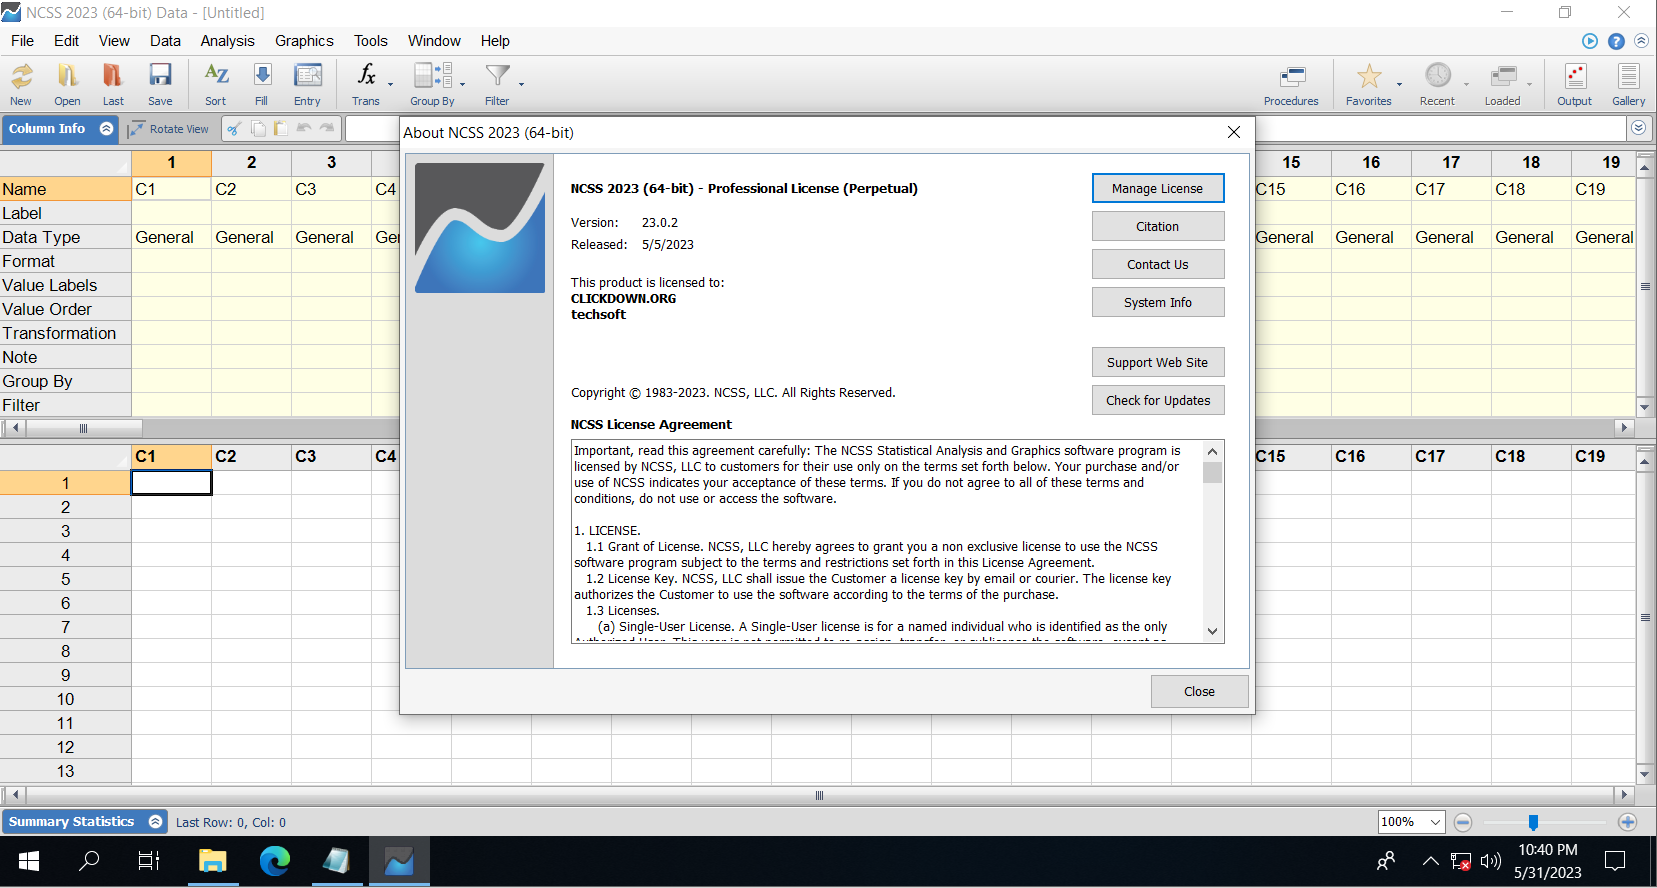 Working with NCSS Pro 2023 v23.0.2 full license